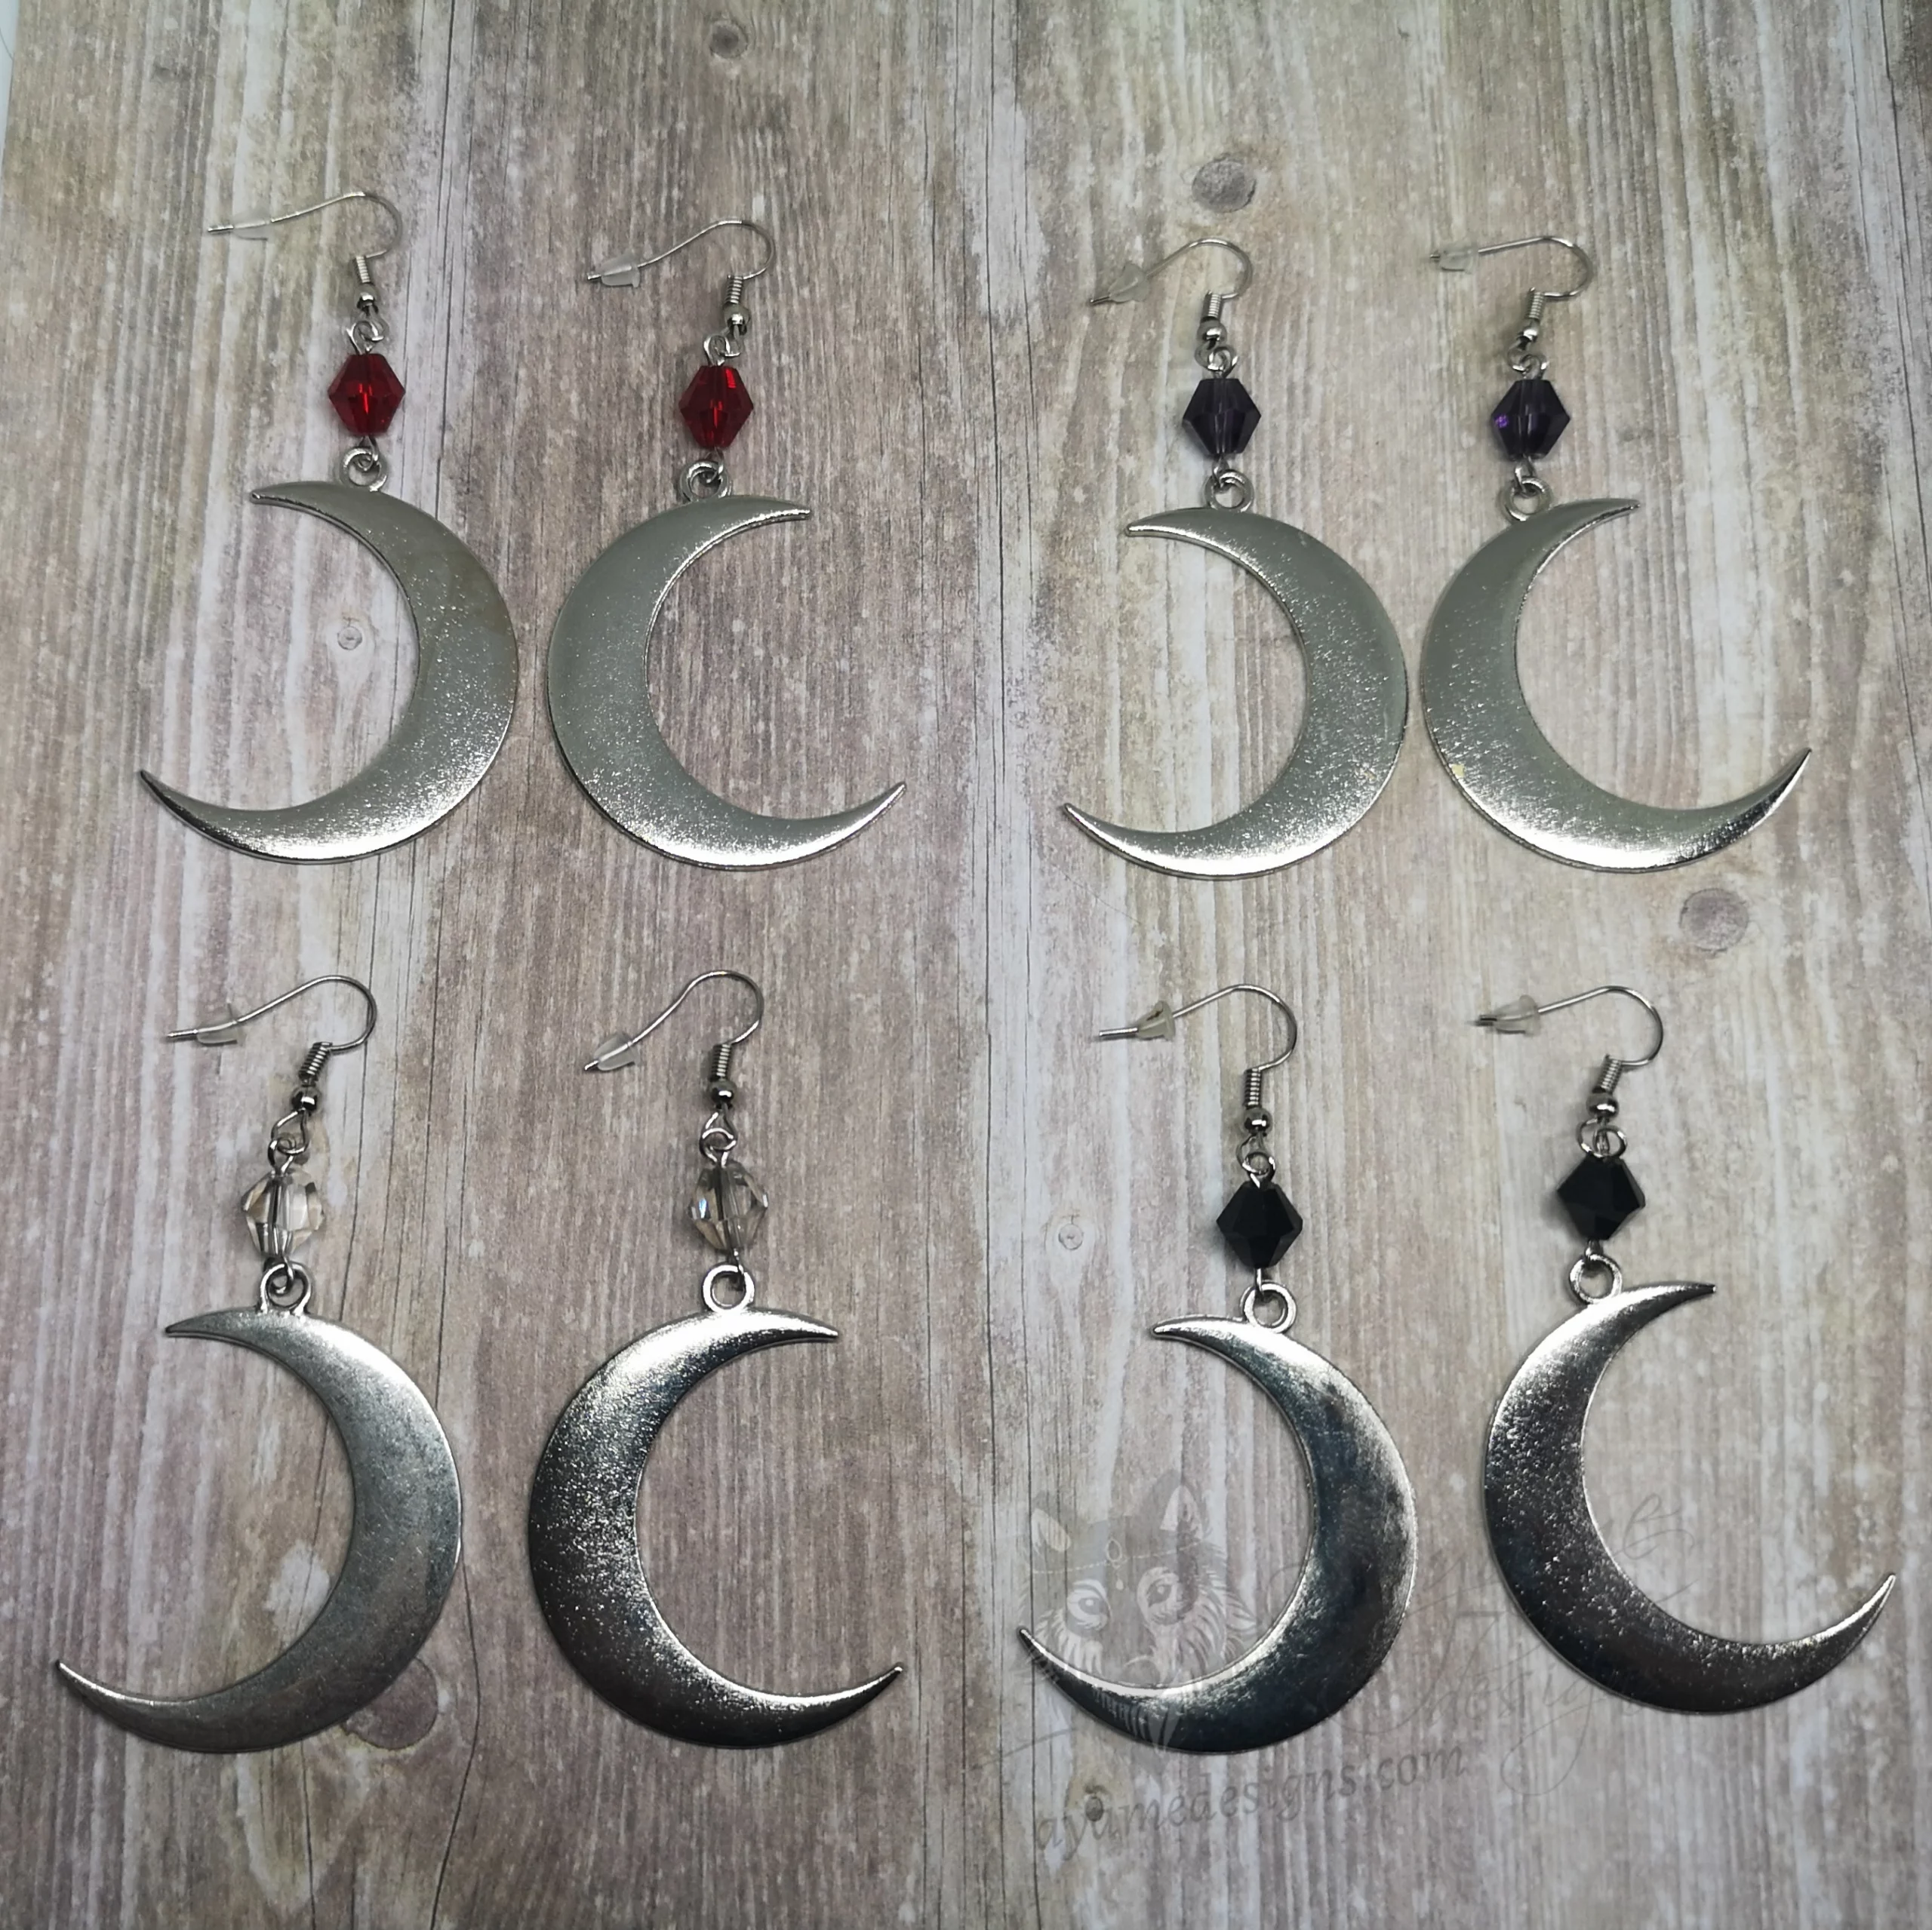 Handmade fantasy earrings with crescent moon charms, Austrian crystal beads and stainless steel earring hooks